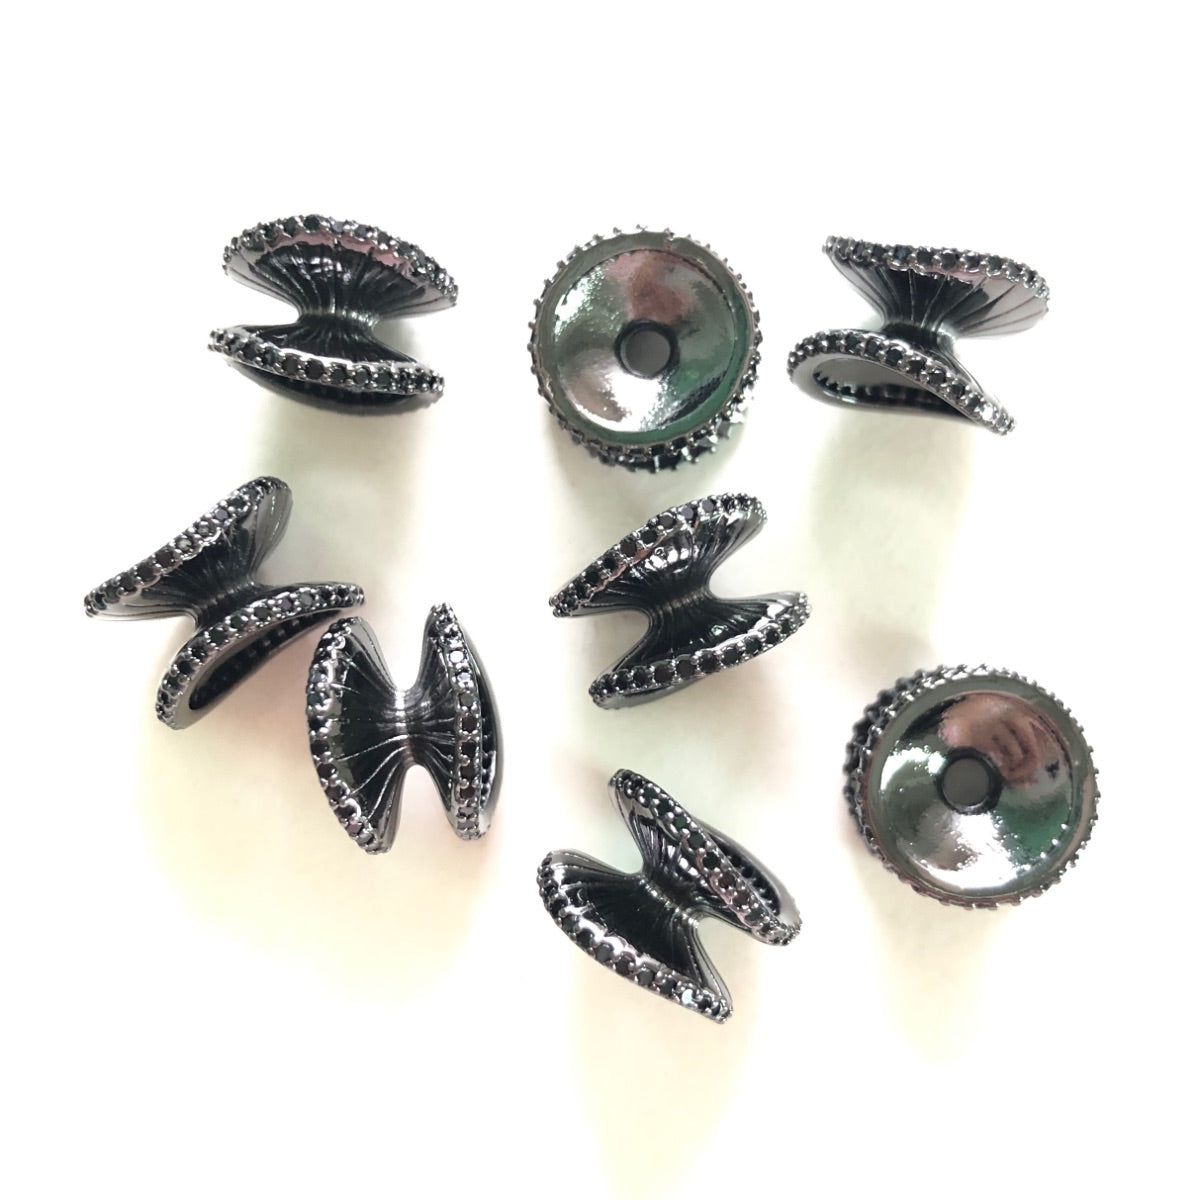 10pcs/lot 13.3*8.7mm CZ Paved Hourglass Spacers Beads Black on Black CZ Paved Spacers Hourglass Beads New Spacers Arrivals Charms Beads Beyond